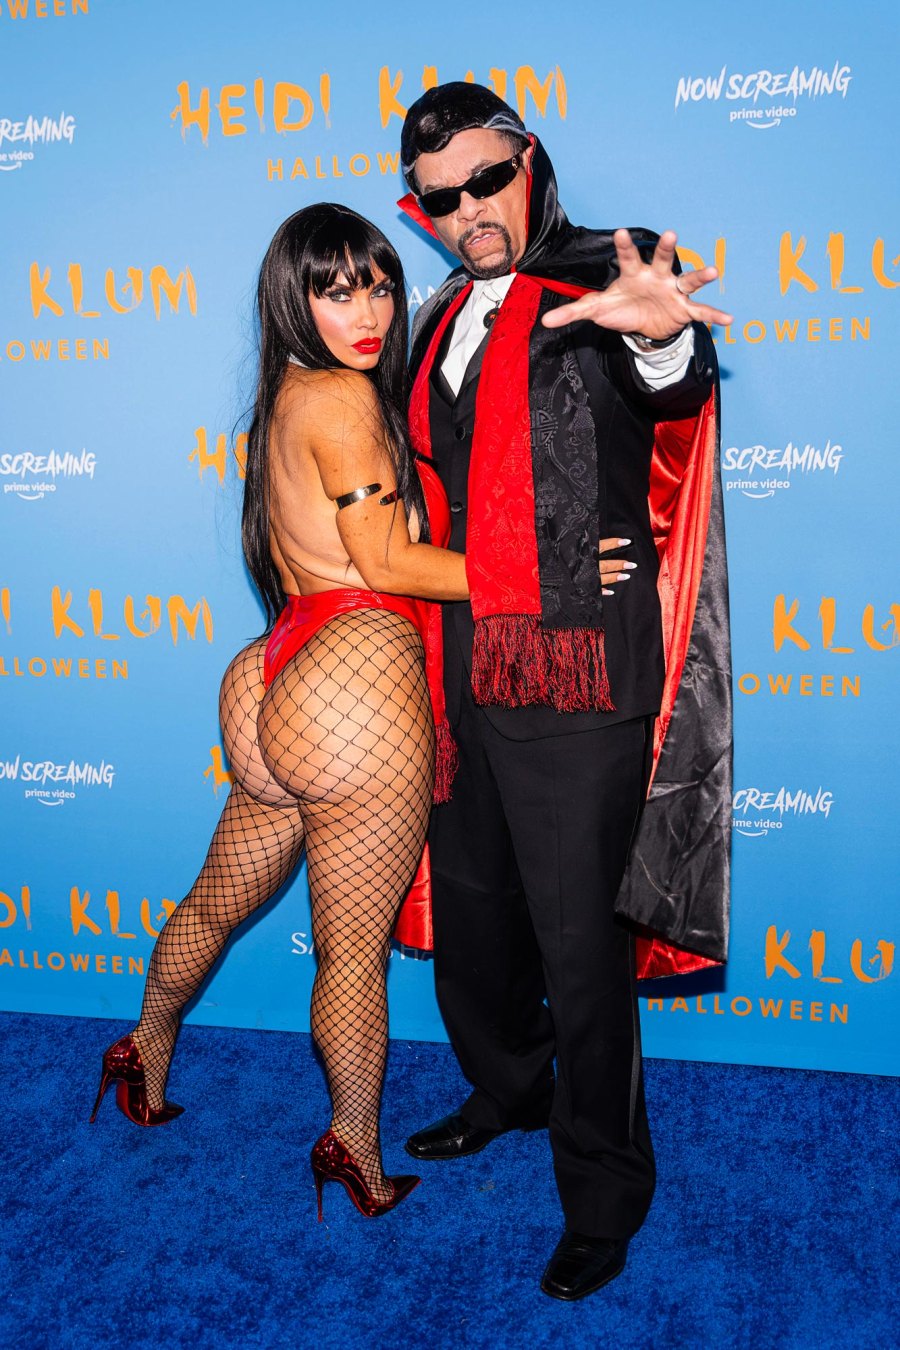 Stars Sexiest Halloween Costumes Bella Hadid Kylie Jenner and More 710